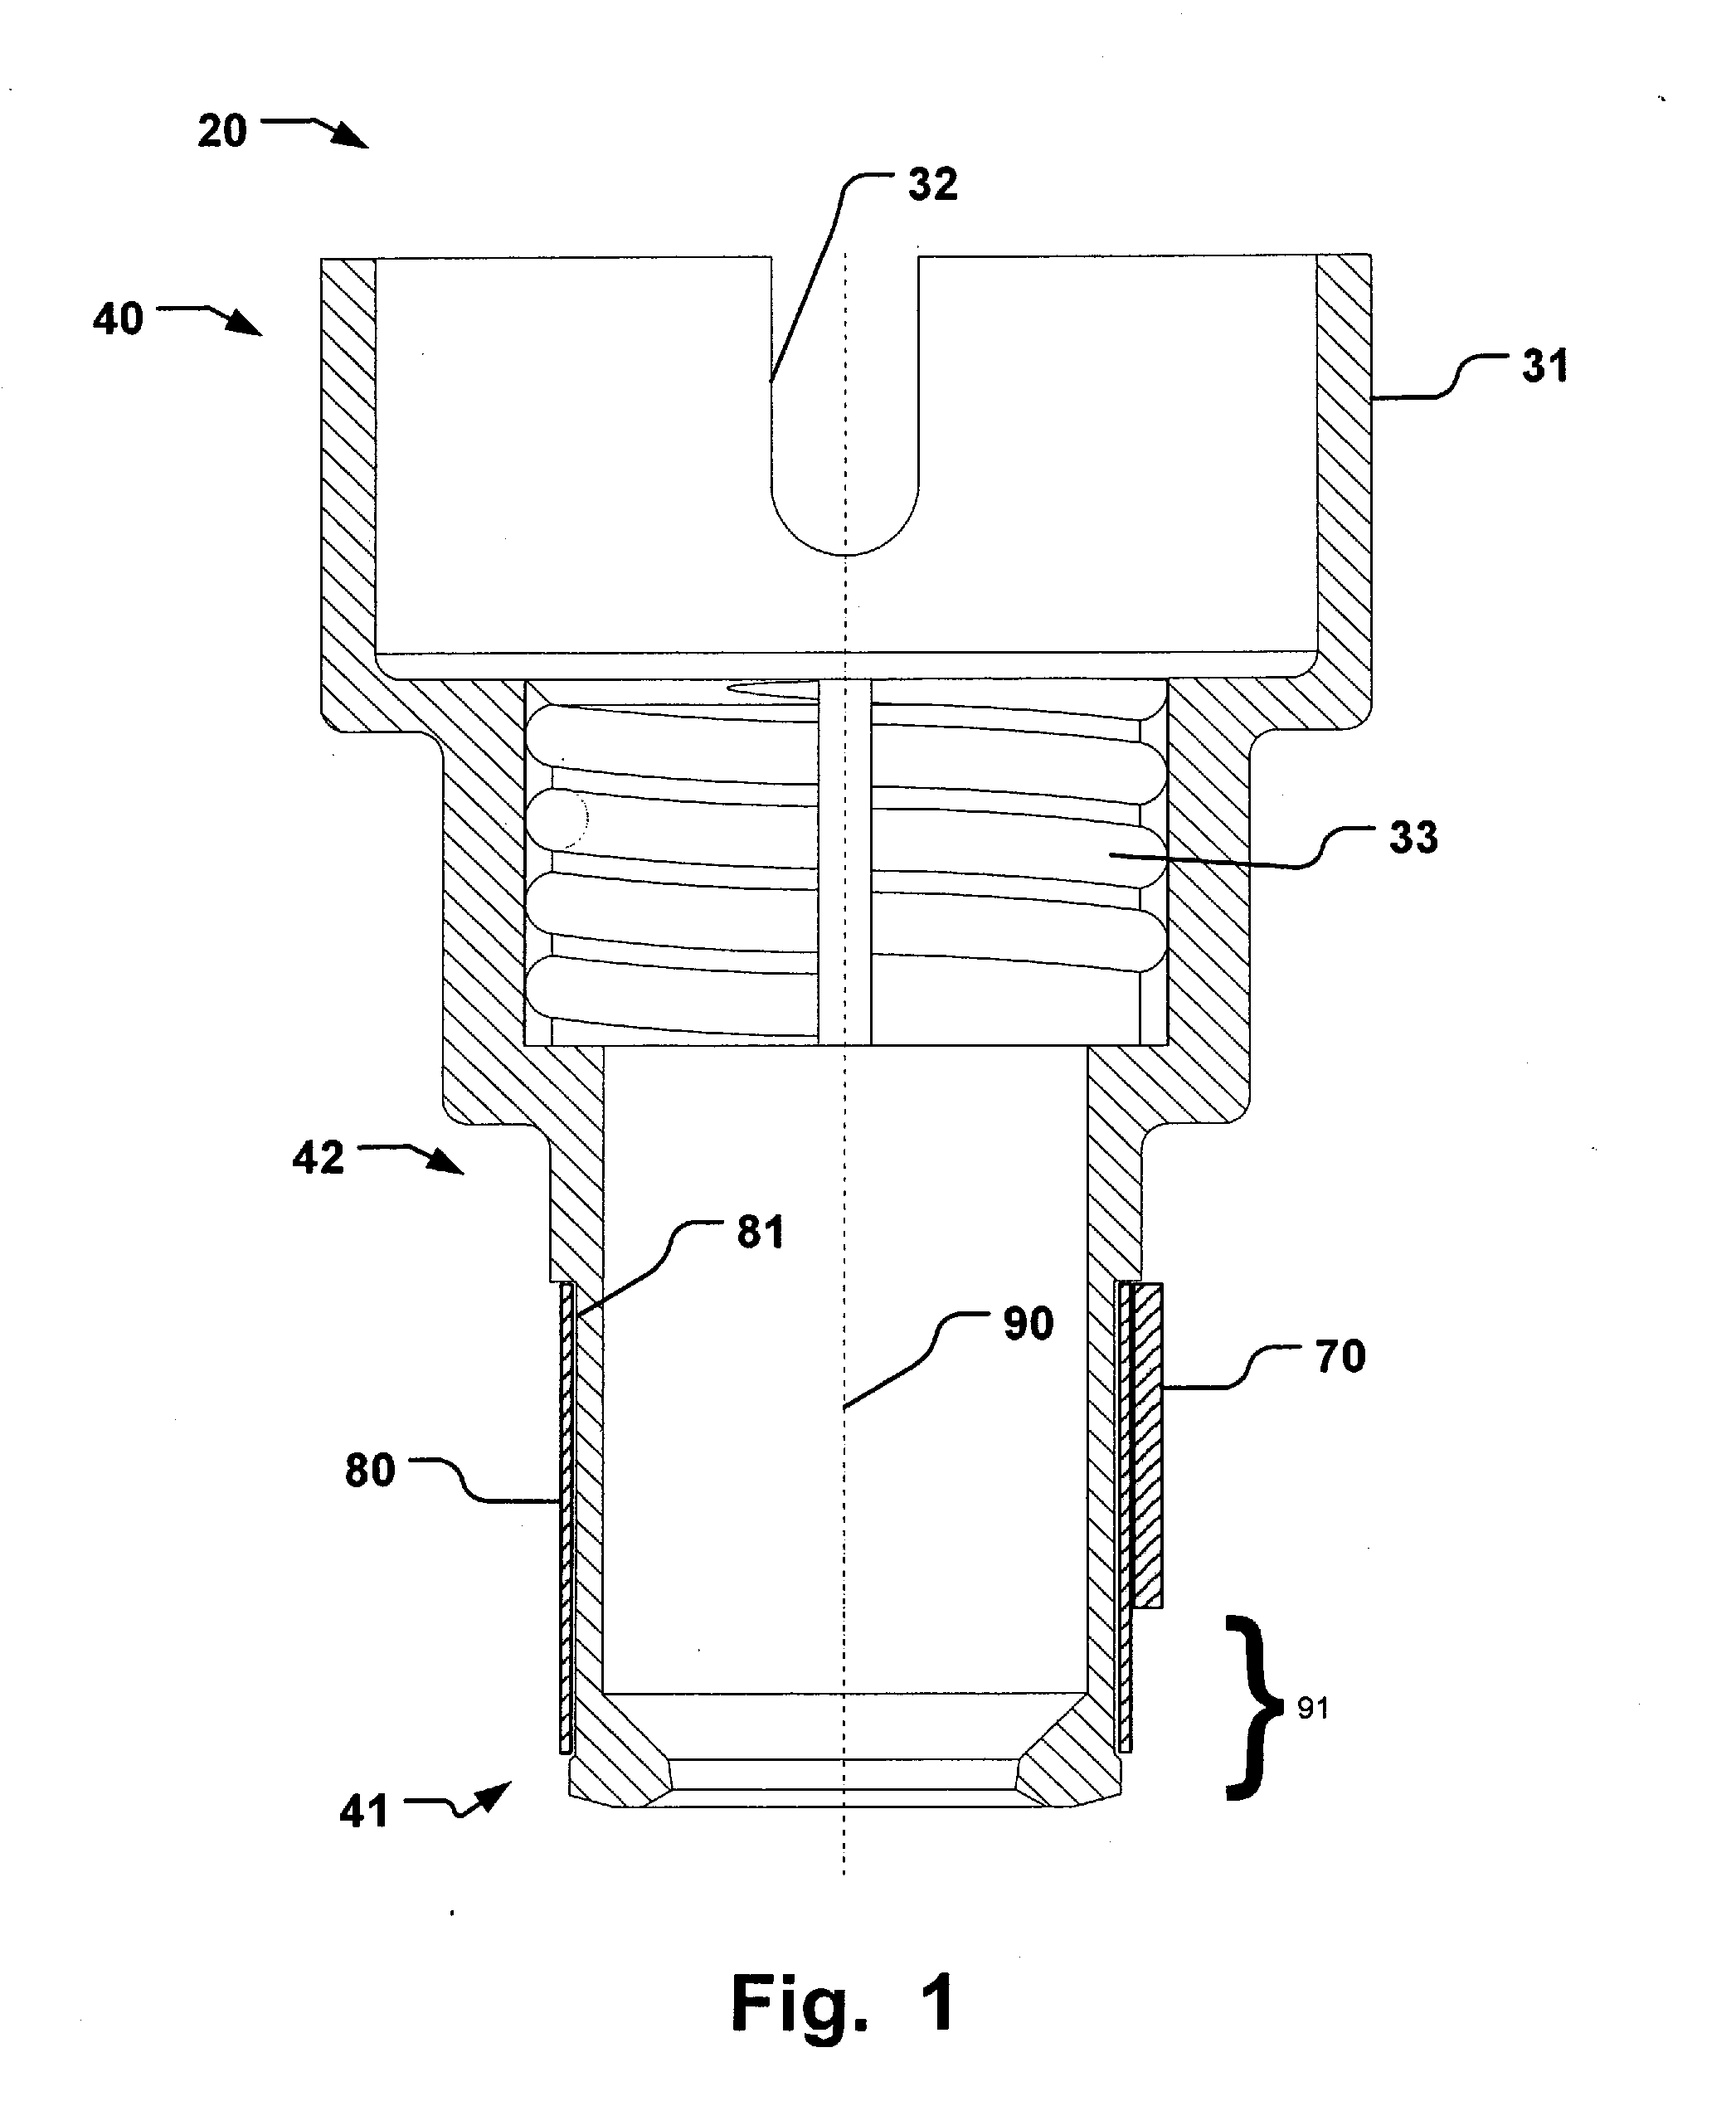 Adapter assembly for an anesthetic equipment